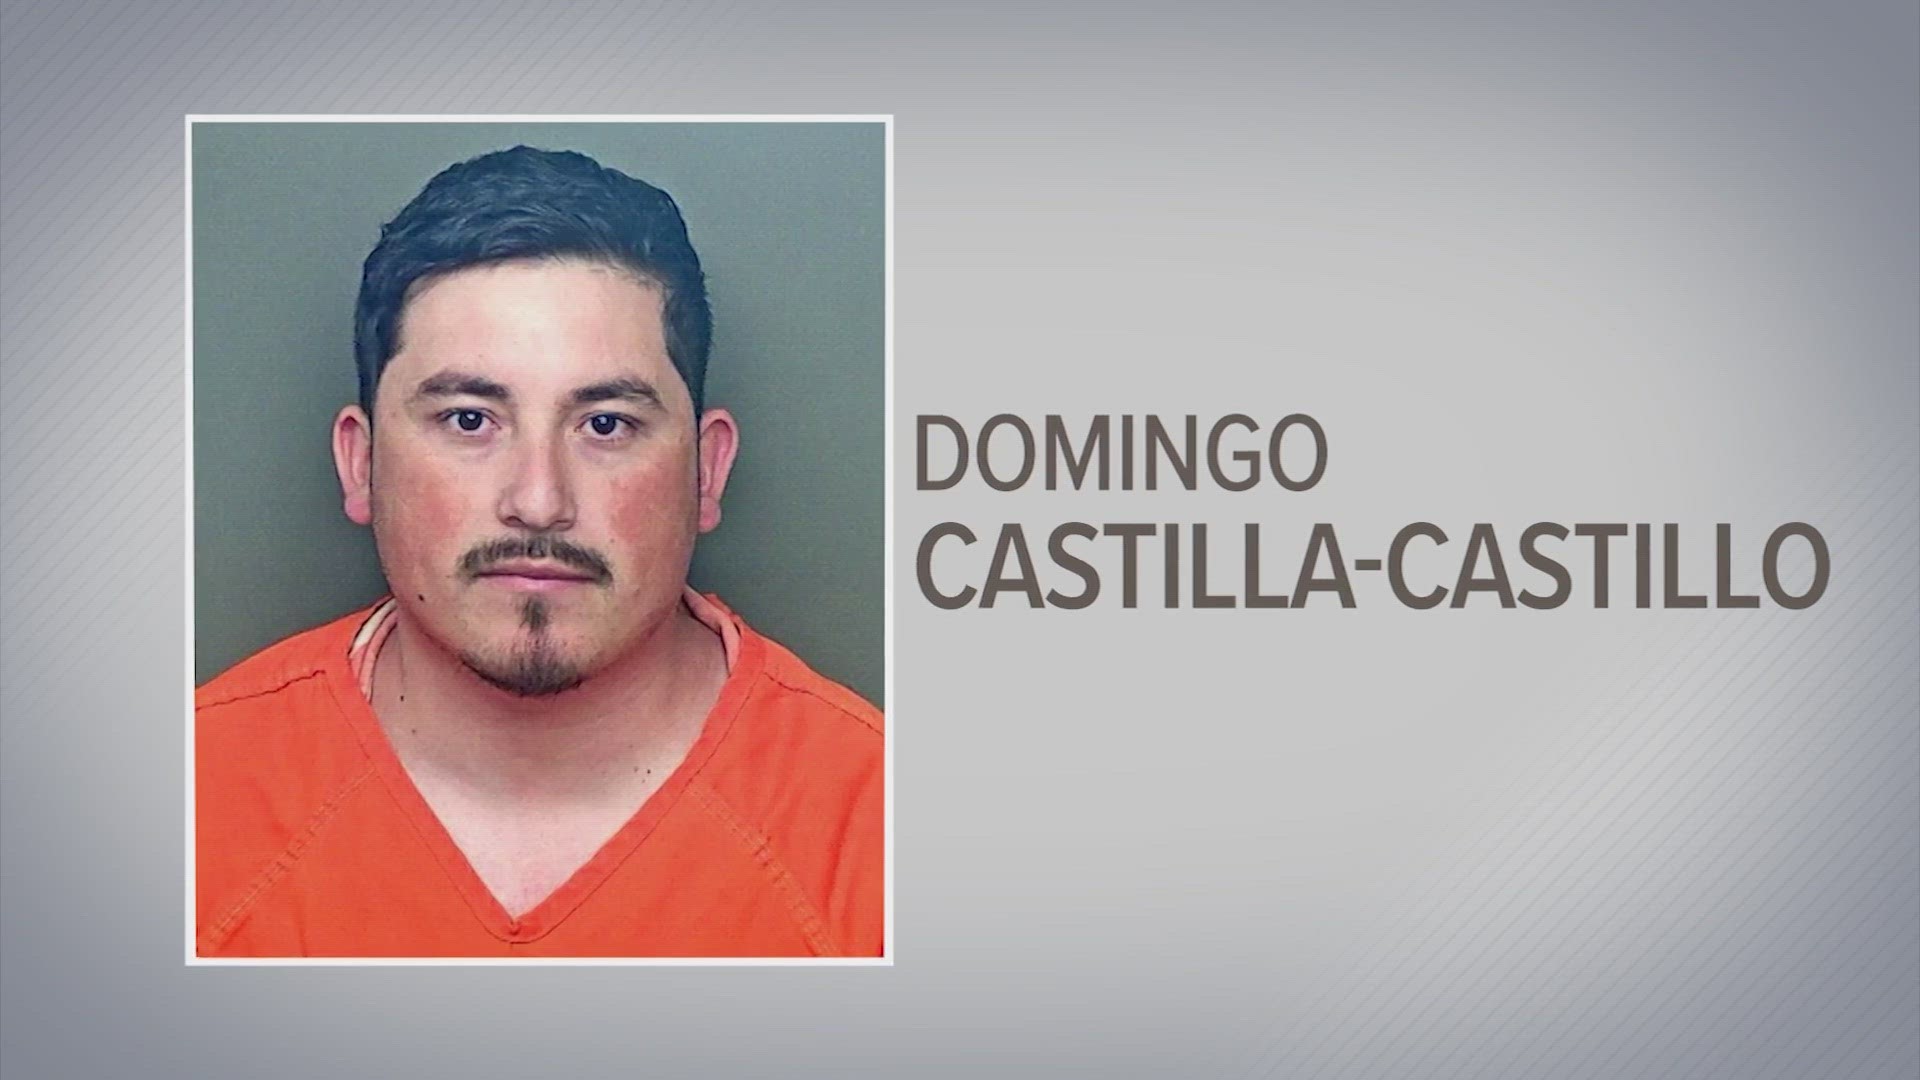 Domingo Castilla-Castillo has been identified as one of Oropeza's friends. He is charged with hindering apprehension. Oropeza's wife has also been charged.